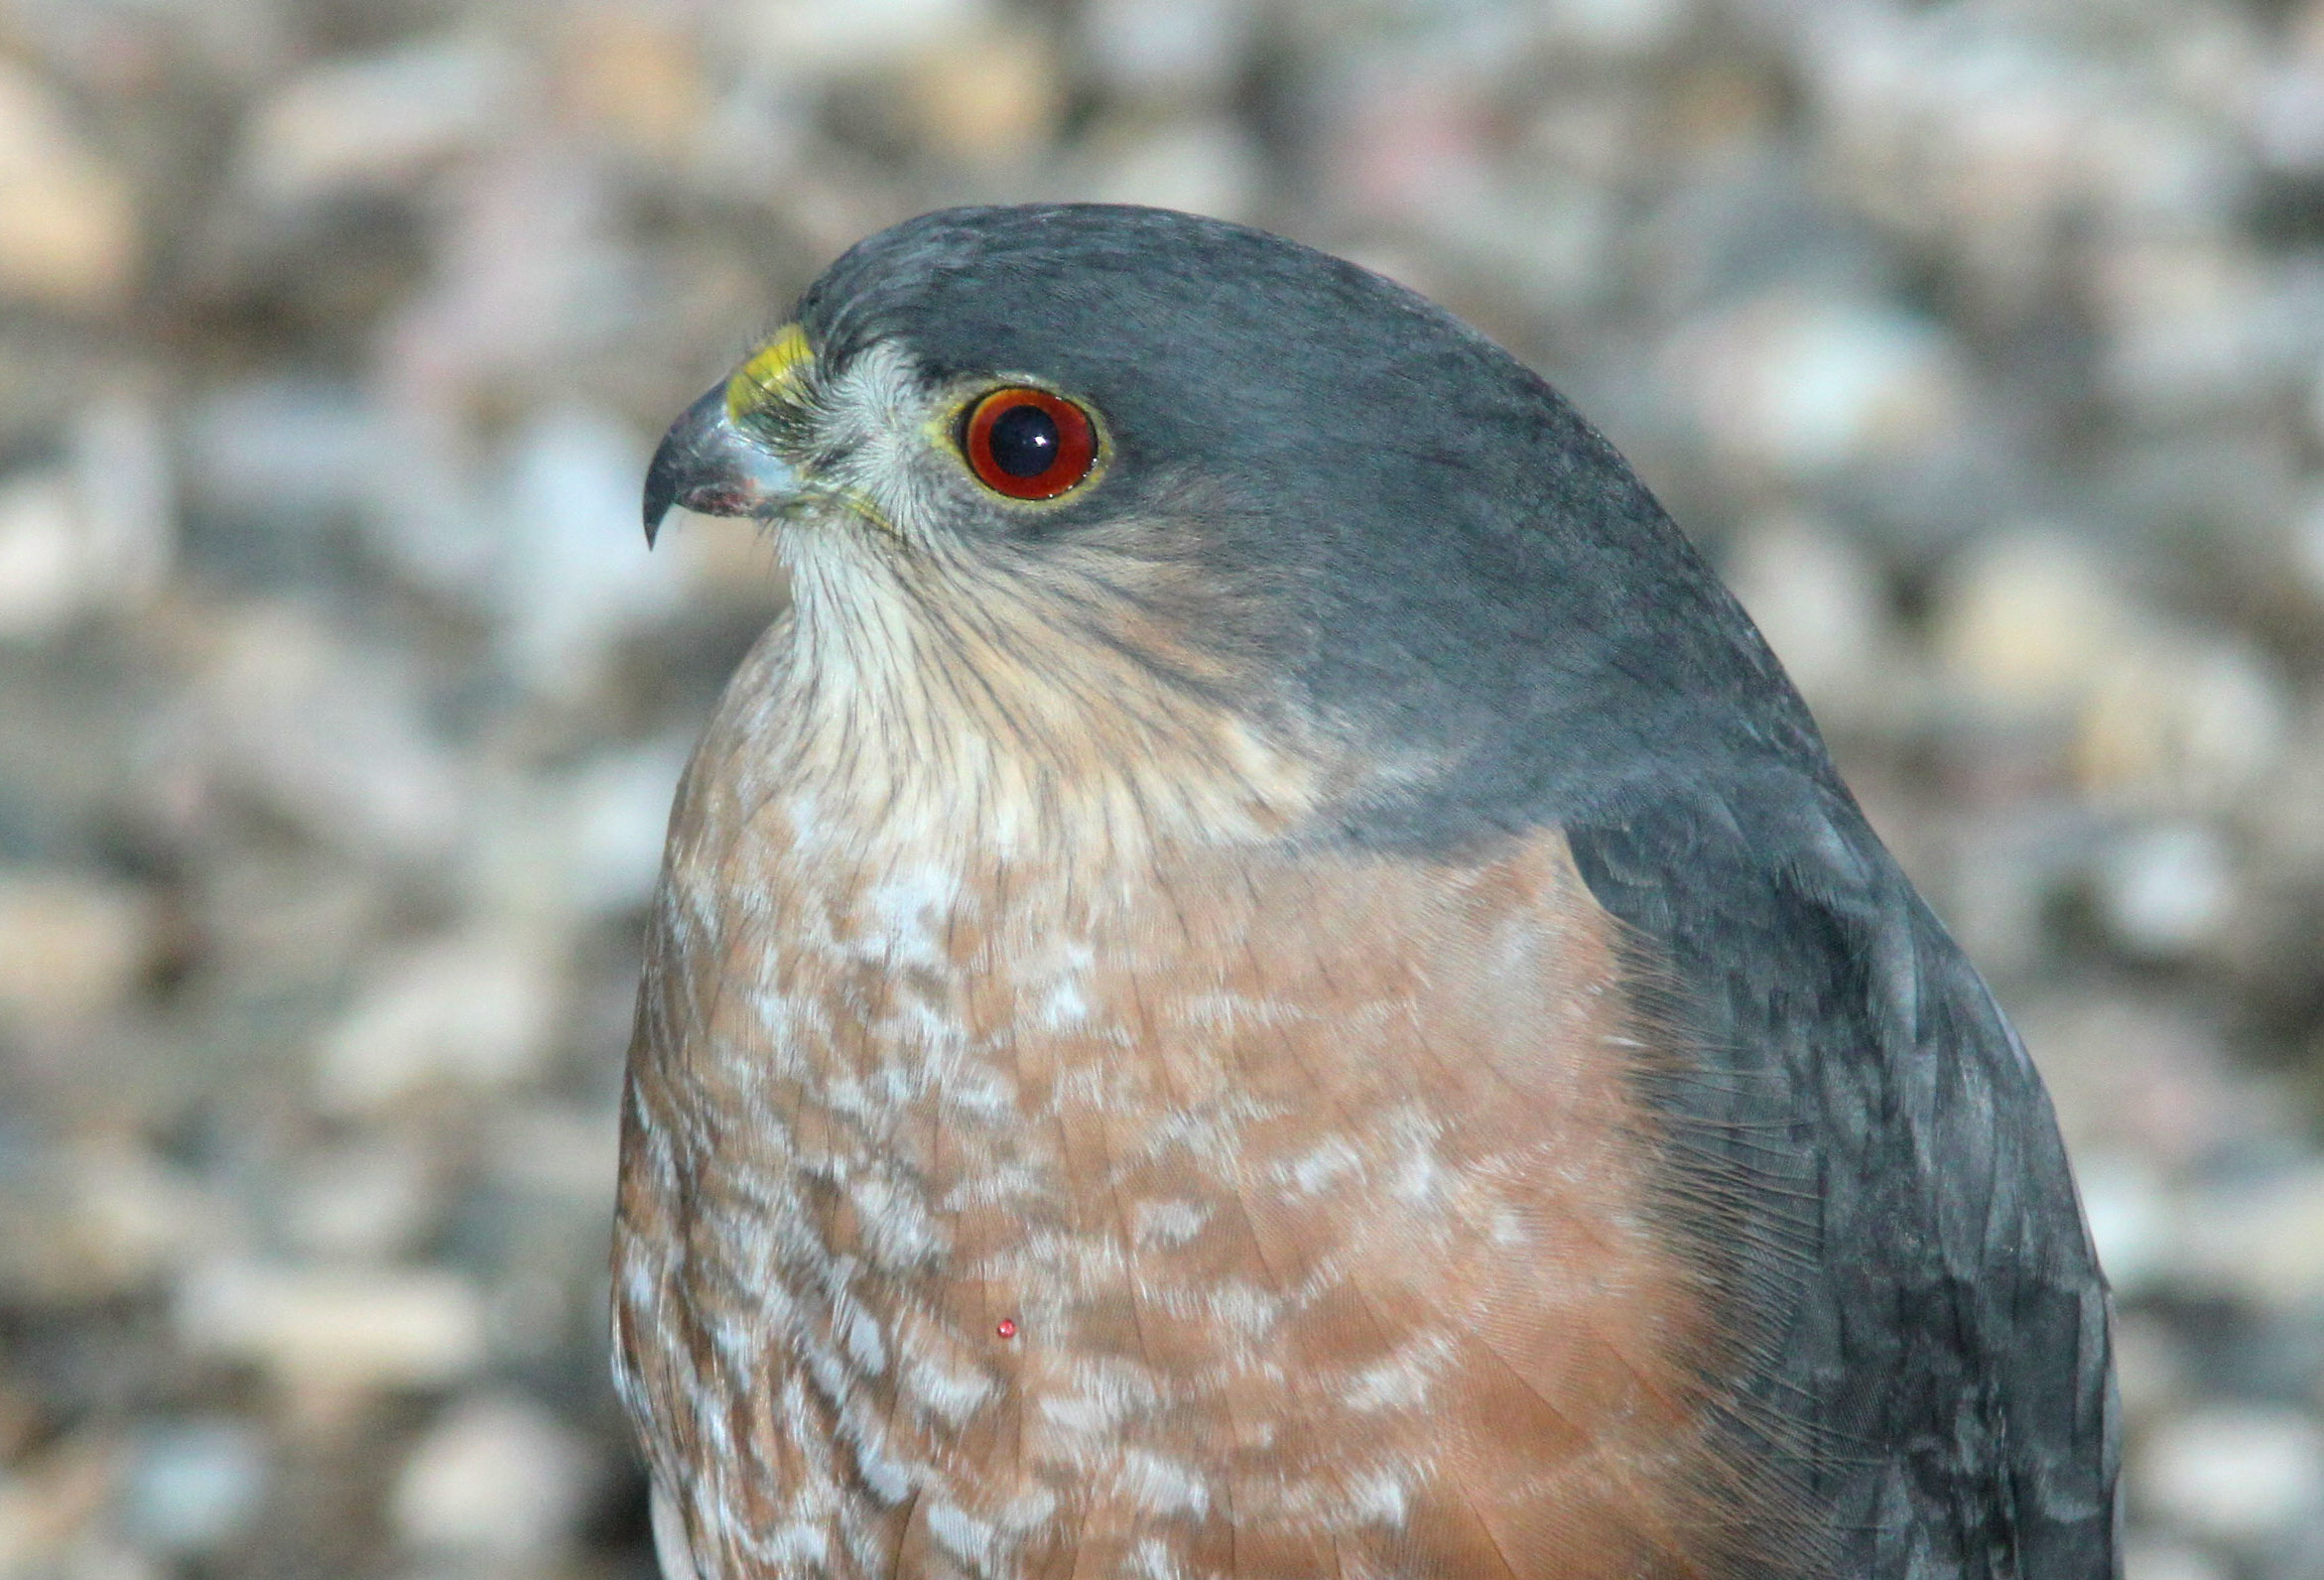 Head shot of a small raptor.  Sharp-shinned hawk is blue-grey on top and white-tan underneath. Round head, red eye faintly ringed in yellow.  Short, hooked beak.